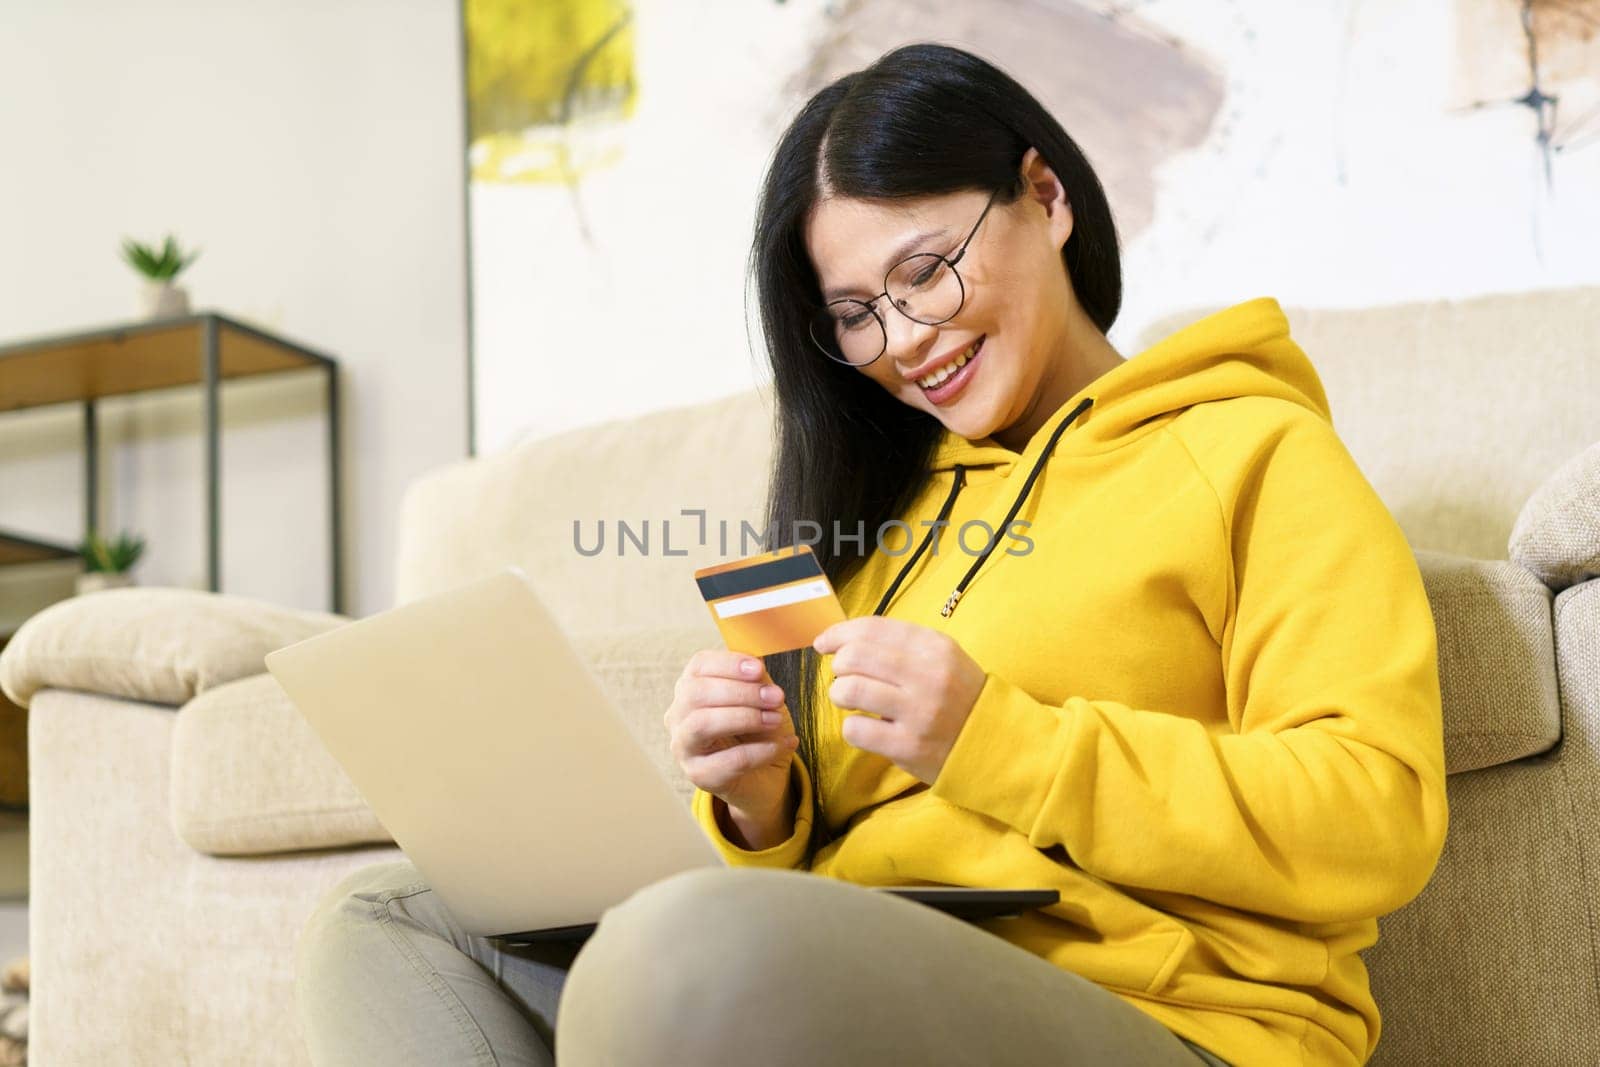 Asian woman is comfortably shopping online from the comfort of her home, with laptop on her lap and bank card in her hand. She is engaged in digital retail, using modern technology and the convenience of e-commerce to make purchase with her credit card. by LipikStockMedia